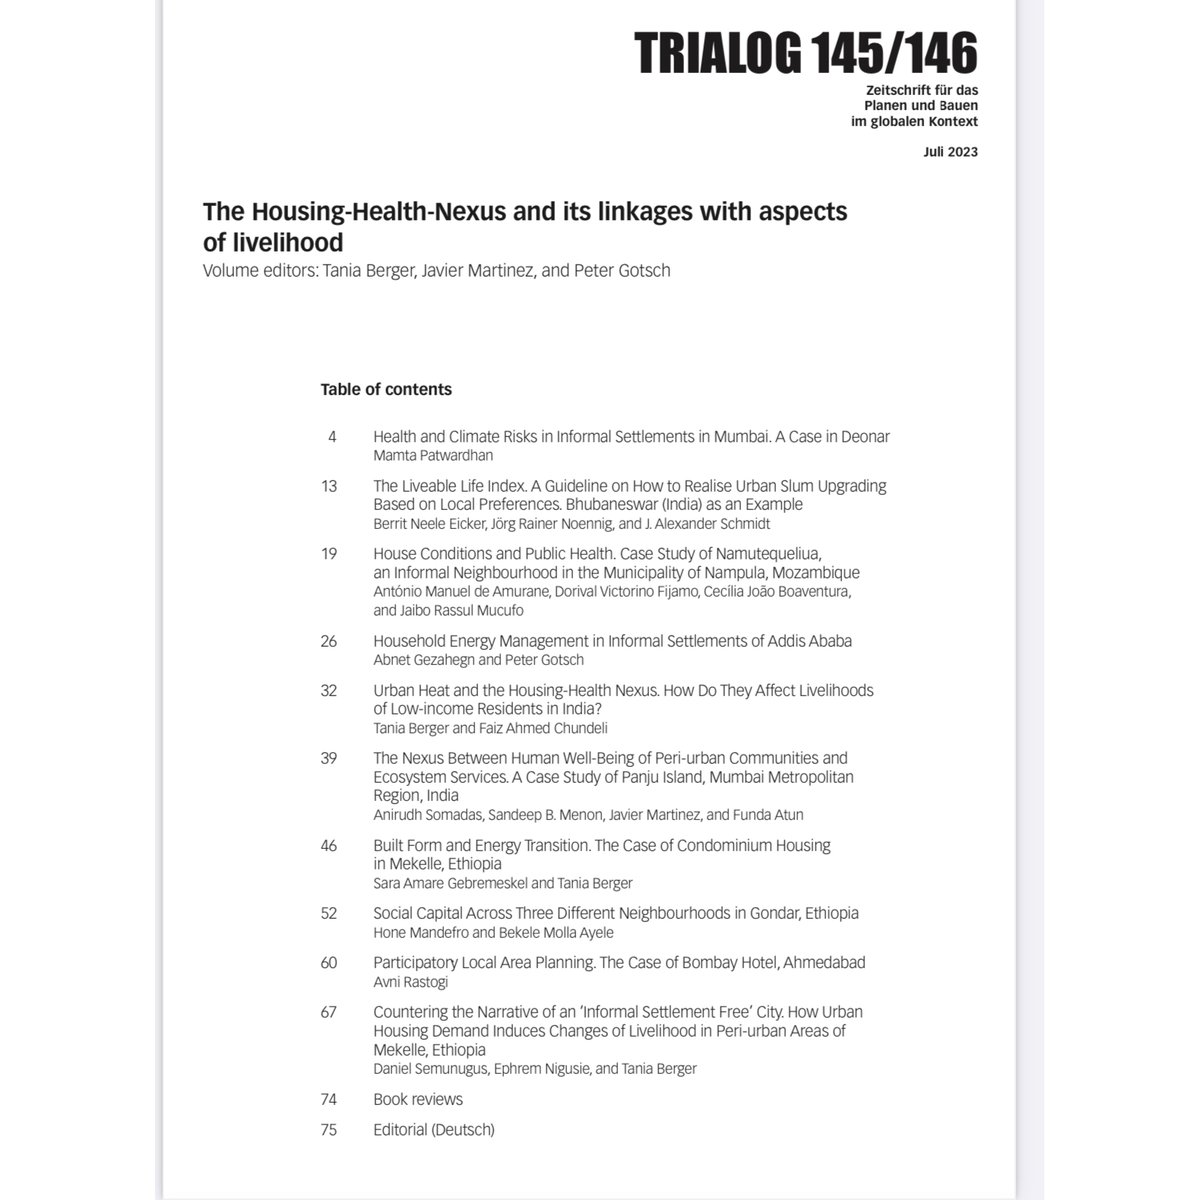 KRVIA, Assistant Professor Mamta Patwardhan’s case study conducted for the Binucom program has been published in the TRIALOG 145/146 Journal 

#krvia #research #vulnerablecommunities #manmadehazards #climaterisk #InclusiveCommunities #ClimateResilience #climatechangeandhealth